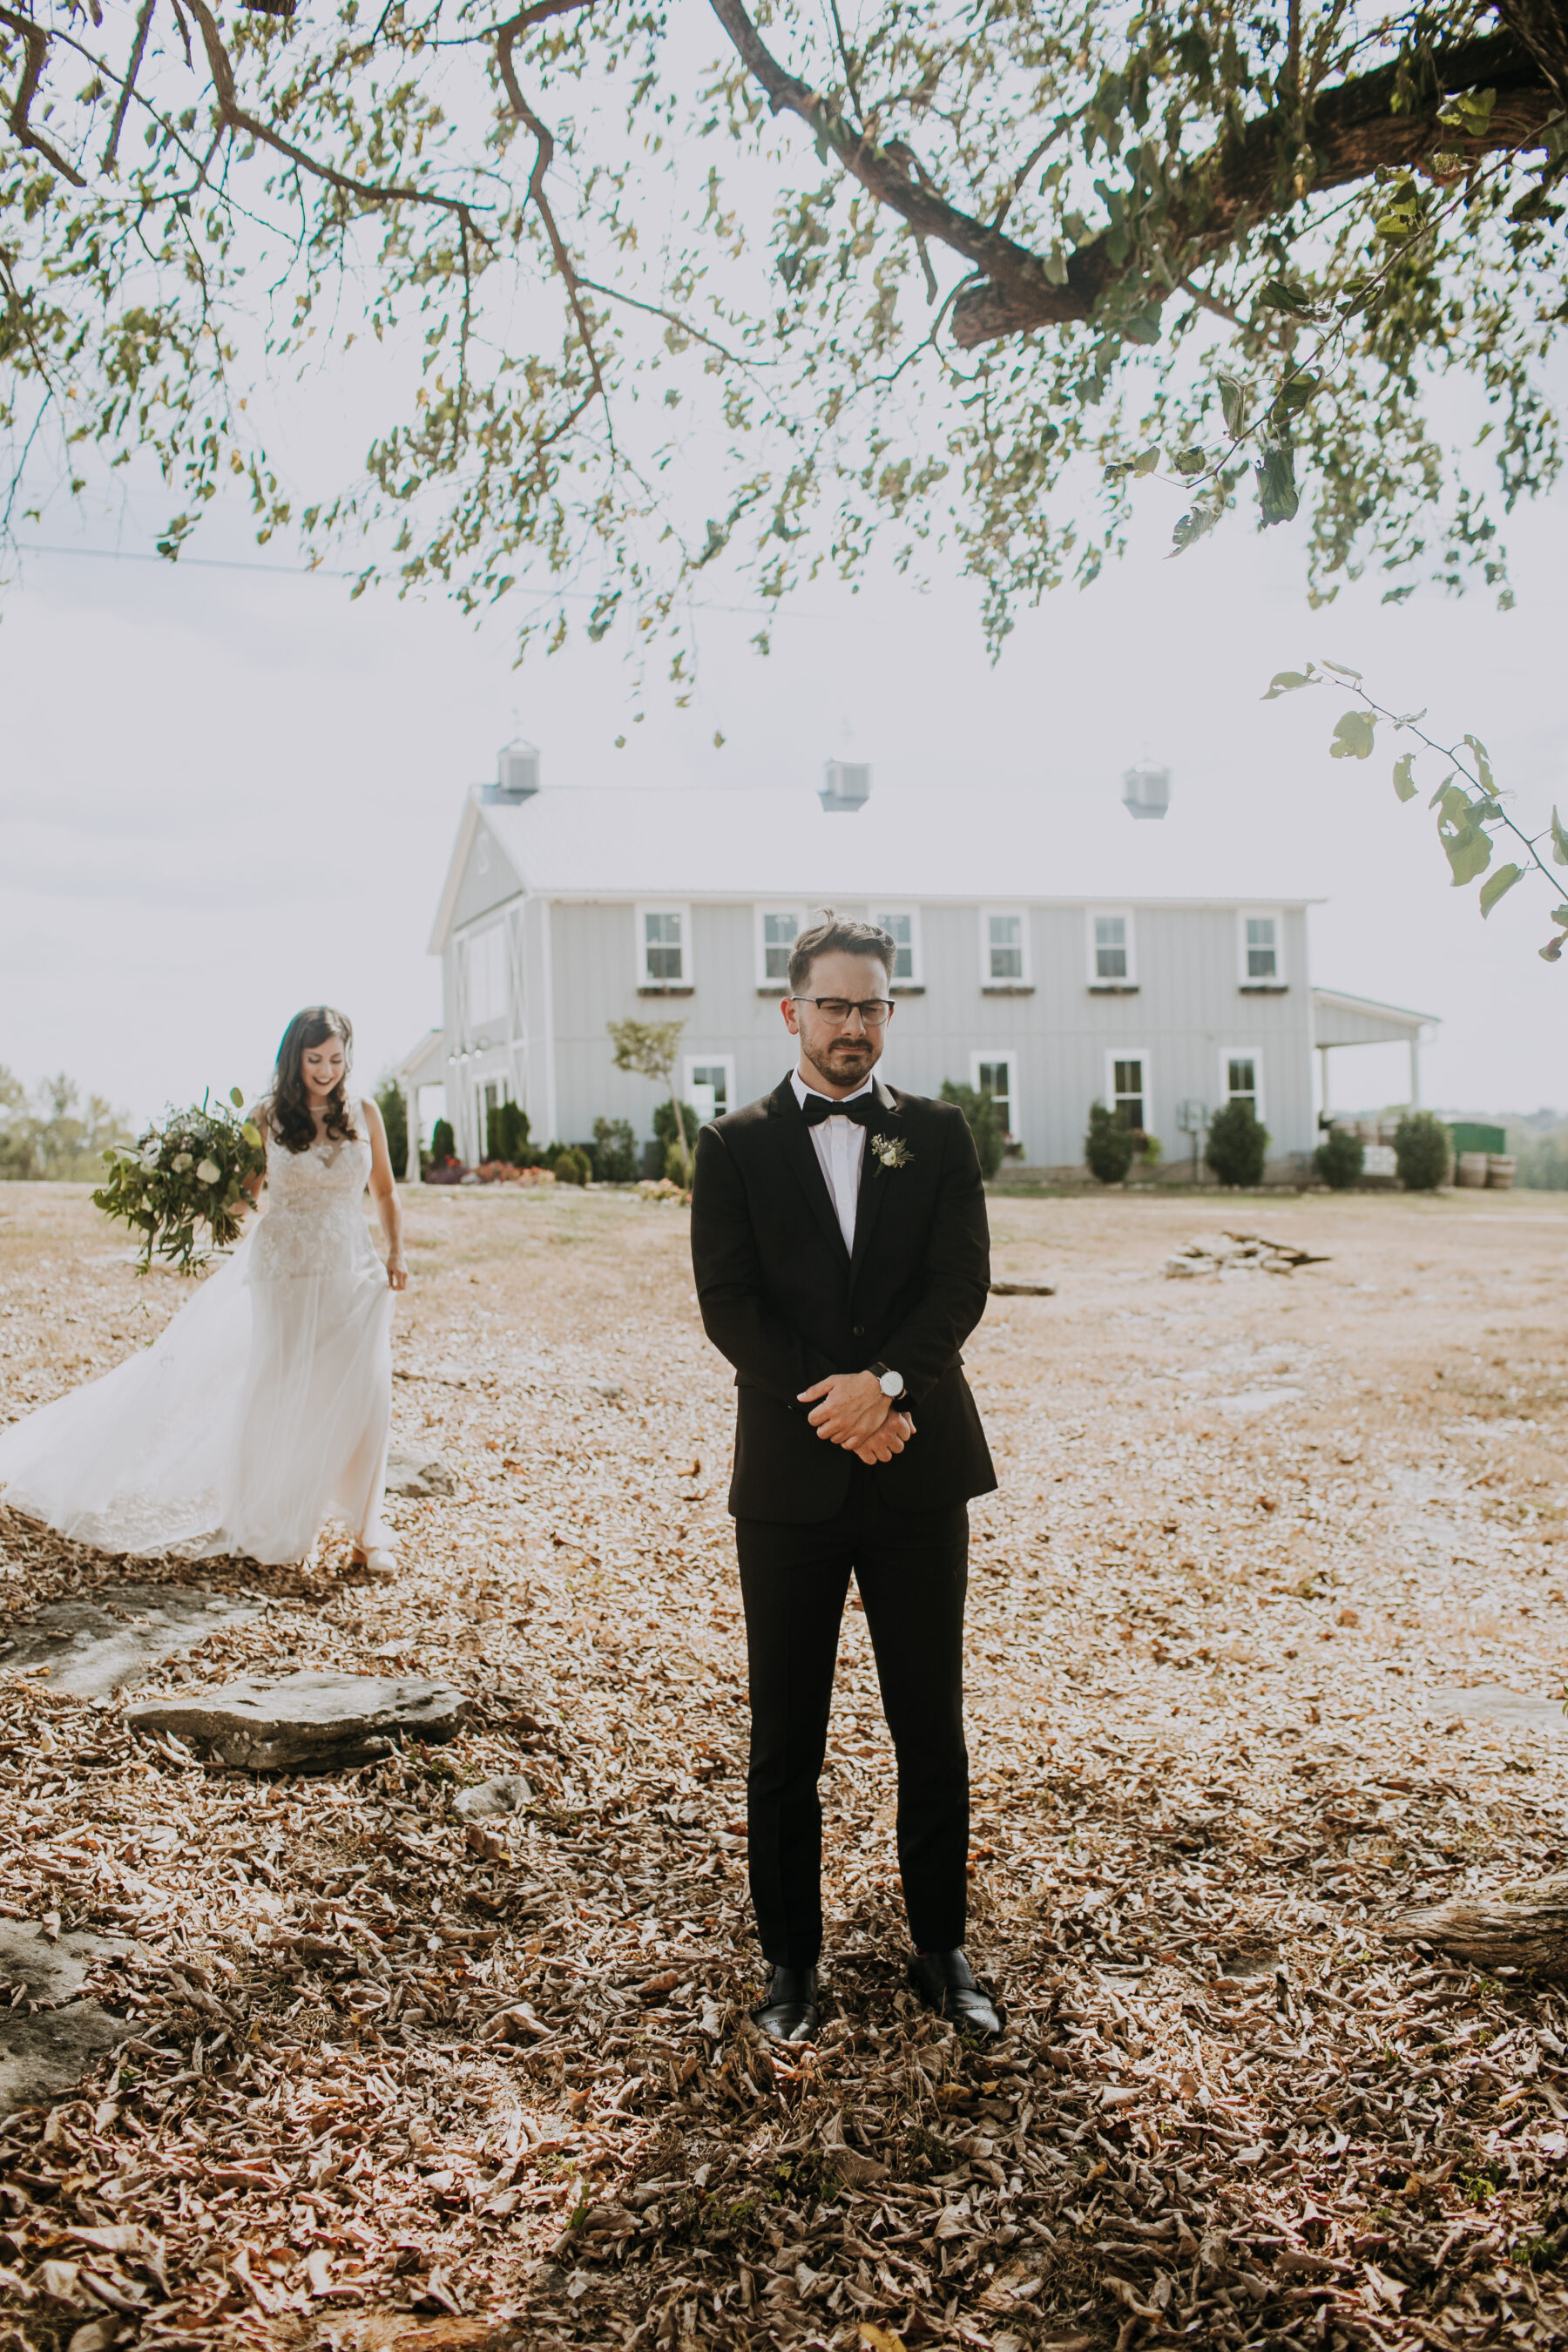 Wedding first look: Nashville Wedding with Beautiful Views by Teale Photography featured on Nashville Bride Guide